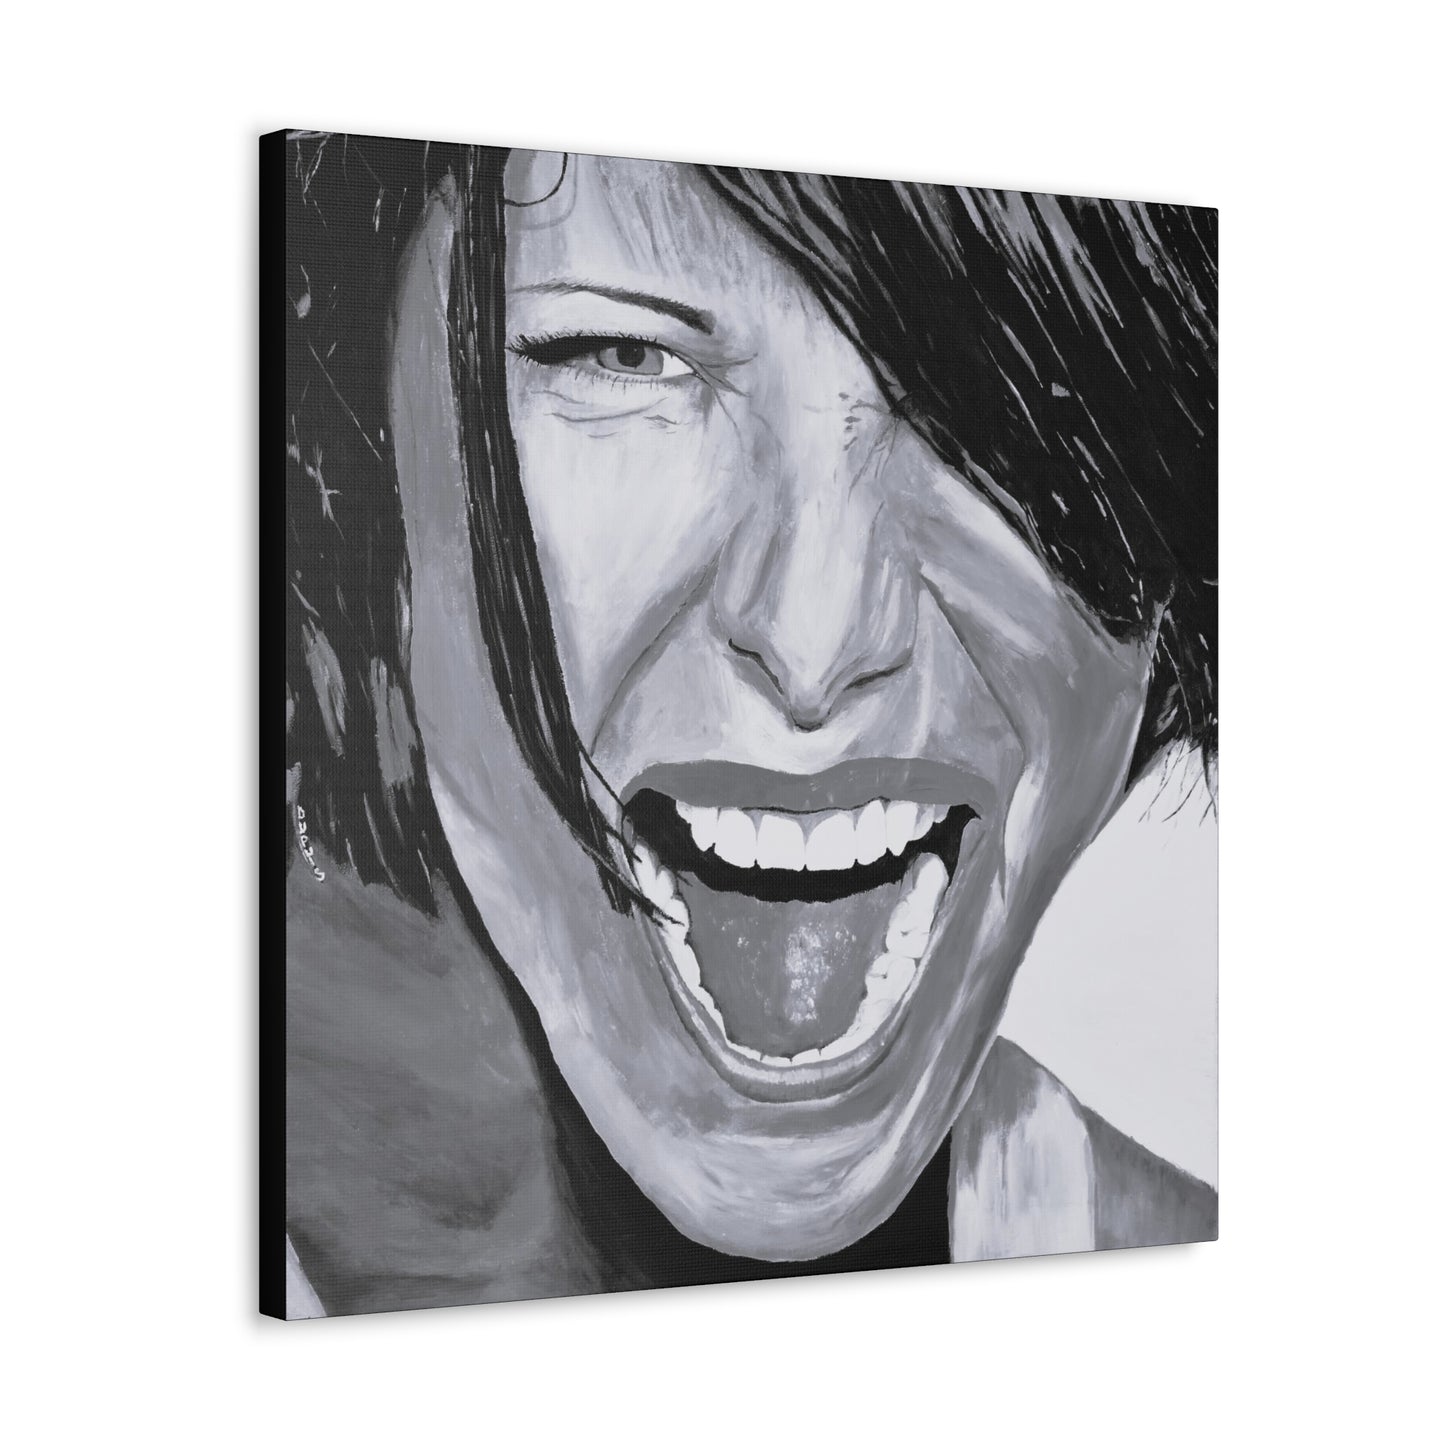 An angled view of a Black and White art print on canvas of a passionate woman showing emotion